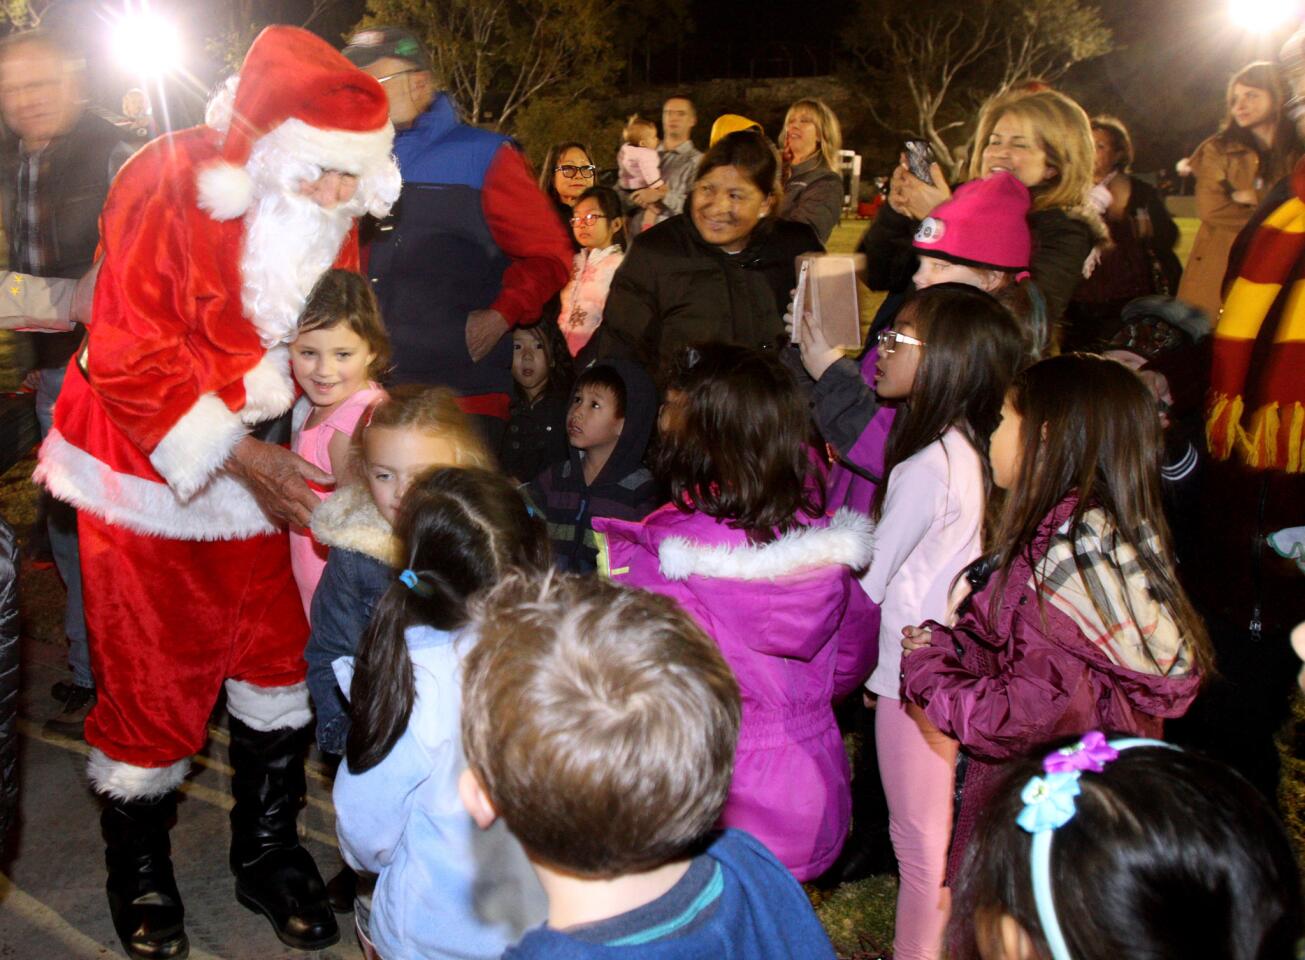 Santa Claus is greeted by young children as he arrived at the 21st Festival in Lights at Memorial Park in La Cañada Flintridge on Friday, Dec. 4, 2015.